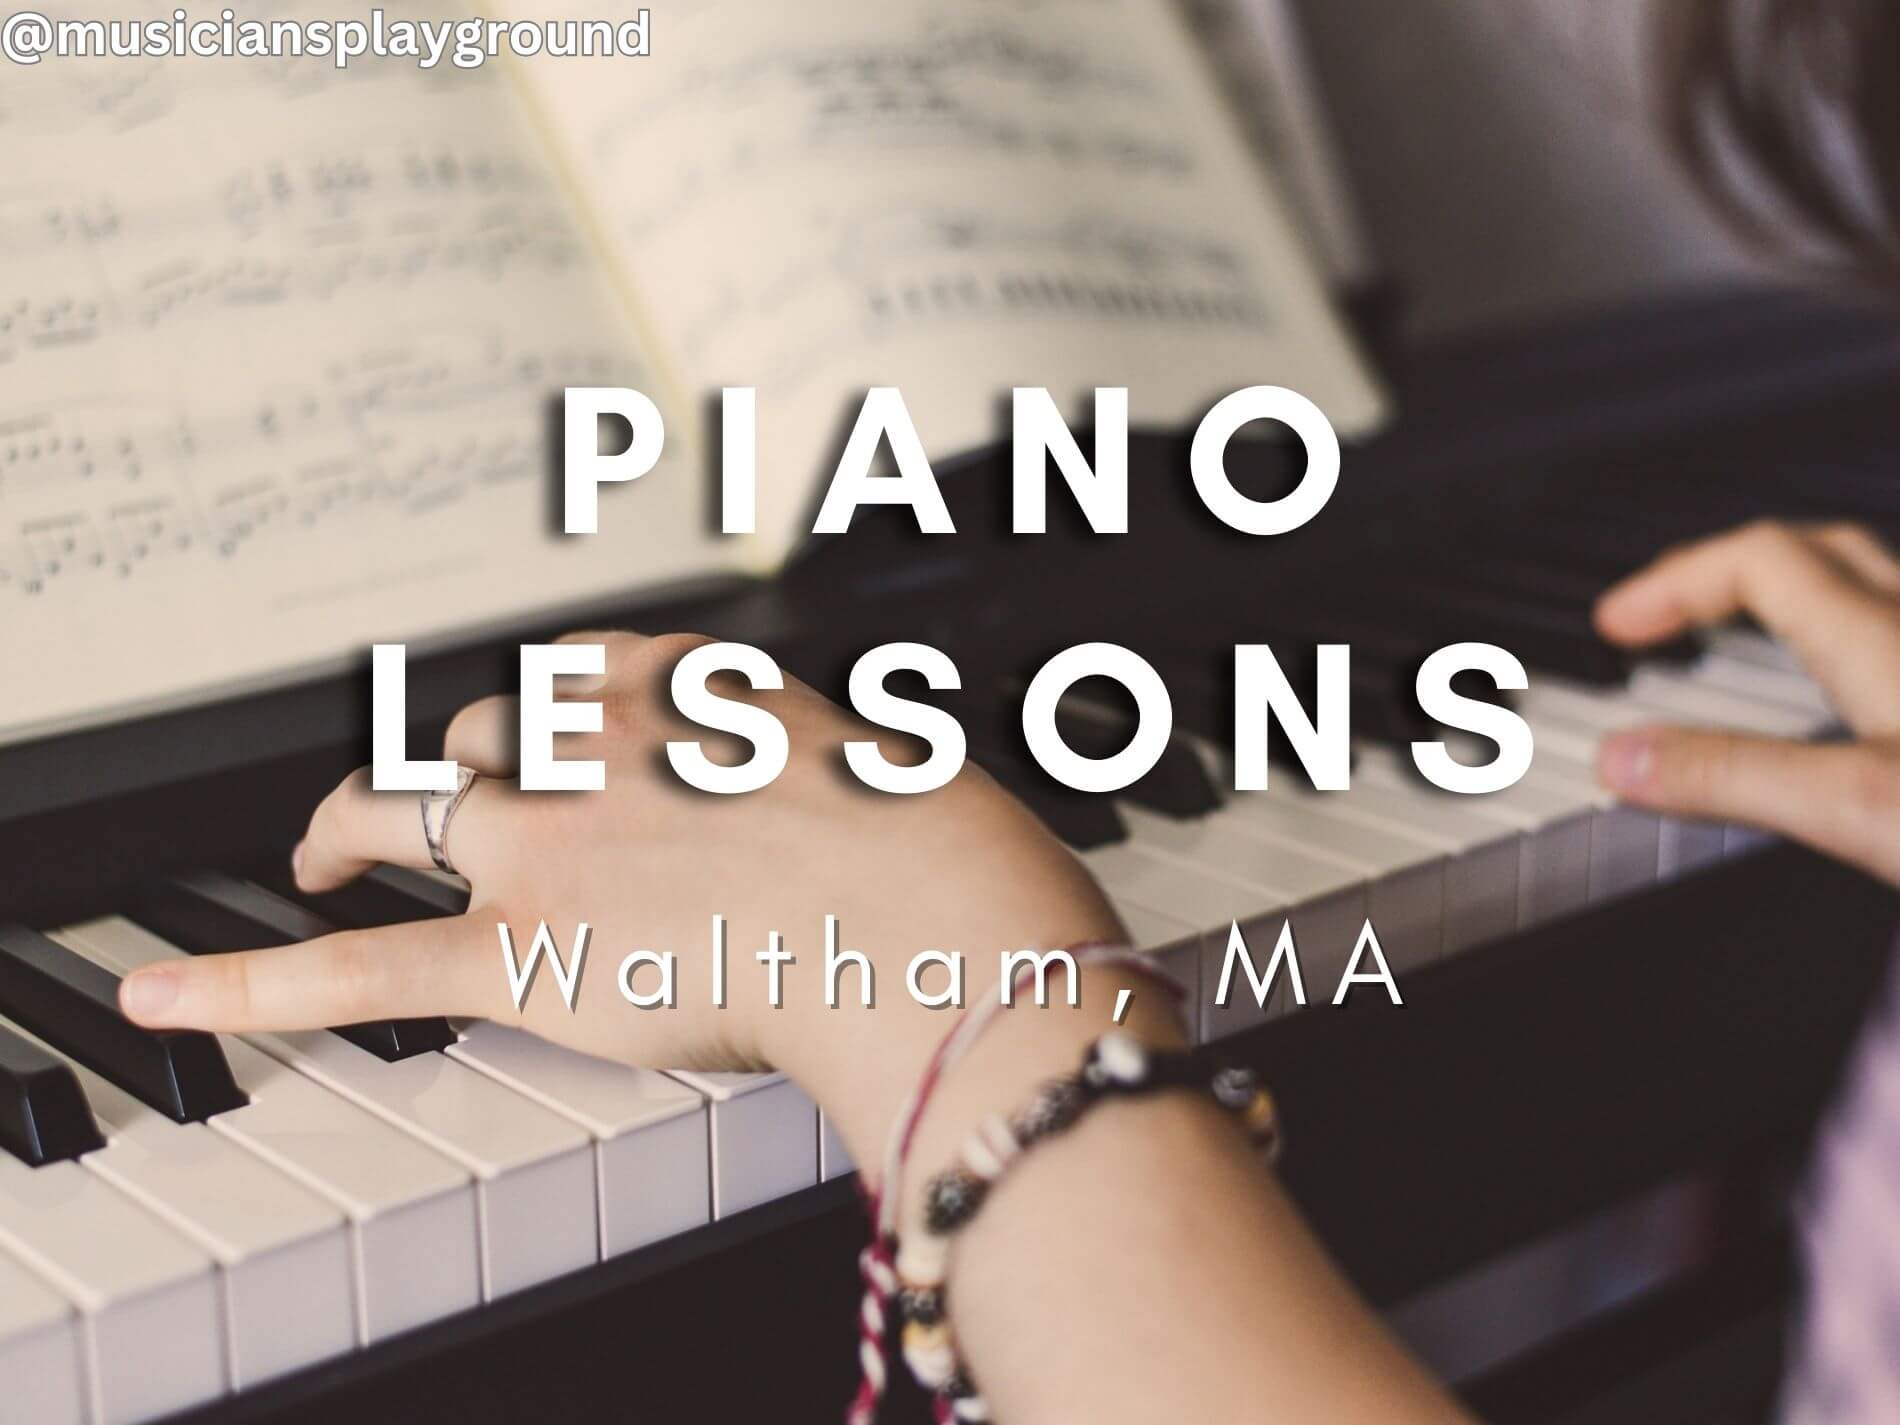 Learn Piano in Waltham, Massachusetts: Practice Lessons, Music Education, Technique, Repertoire, and Practice Tips